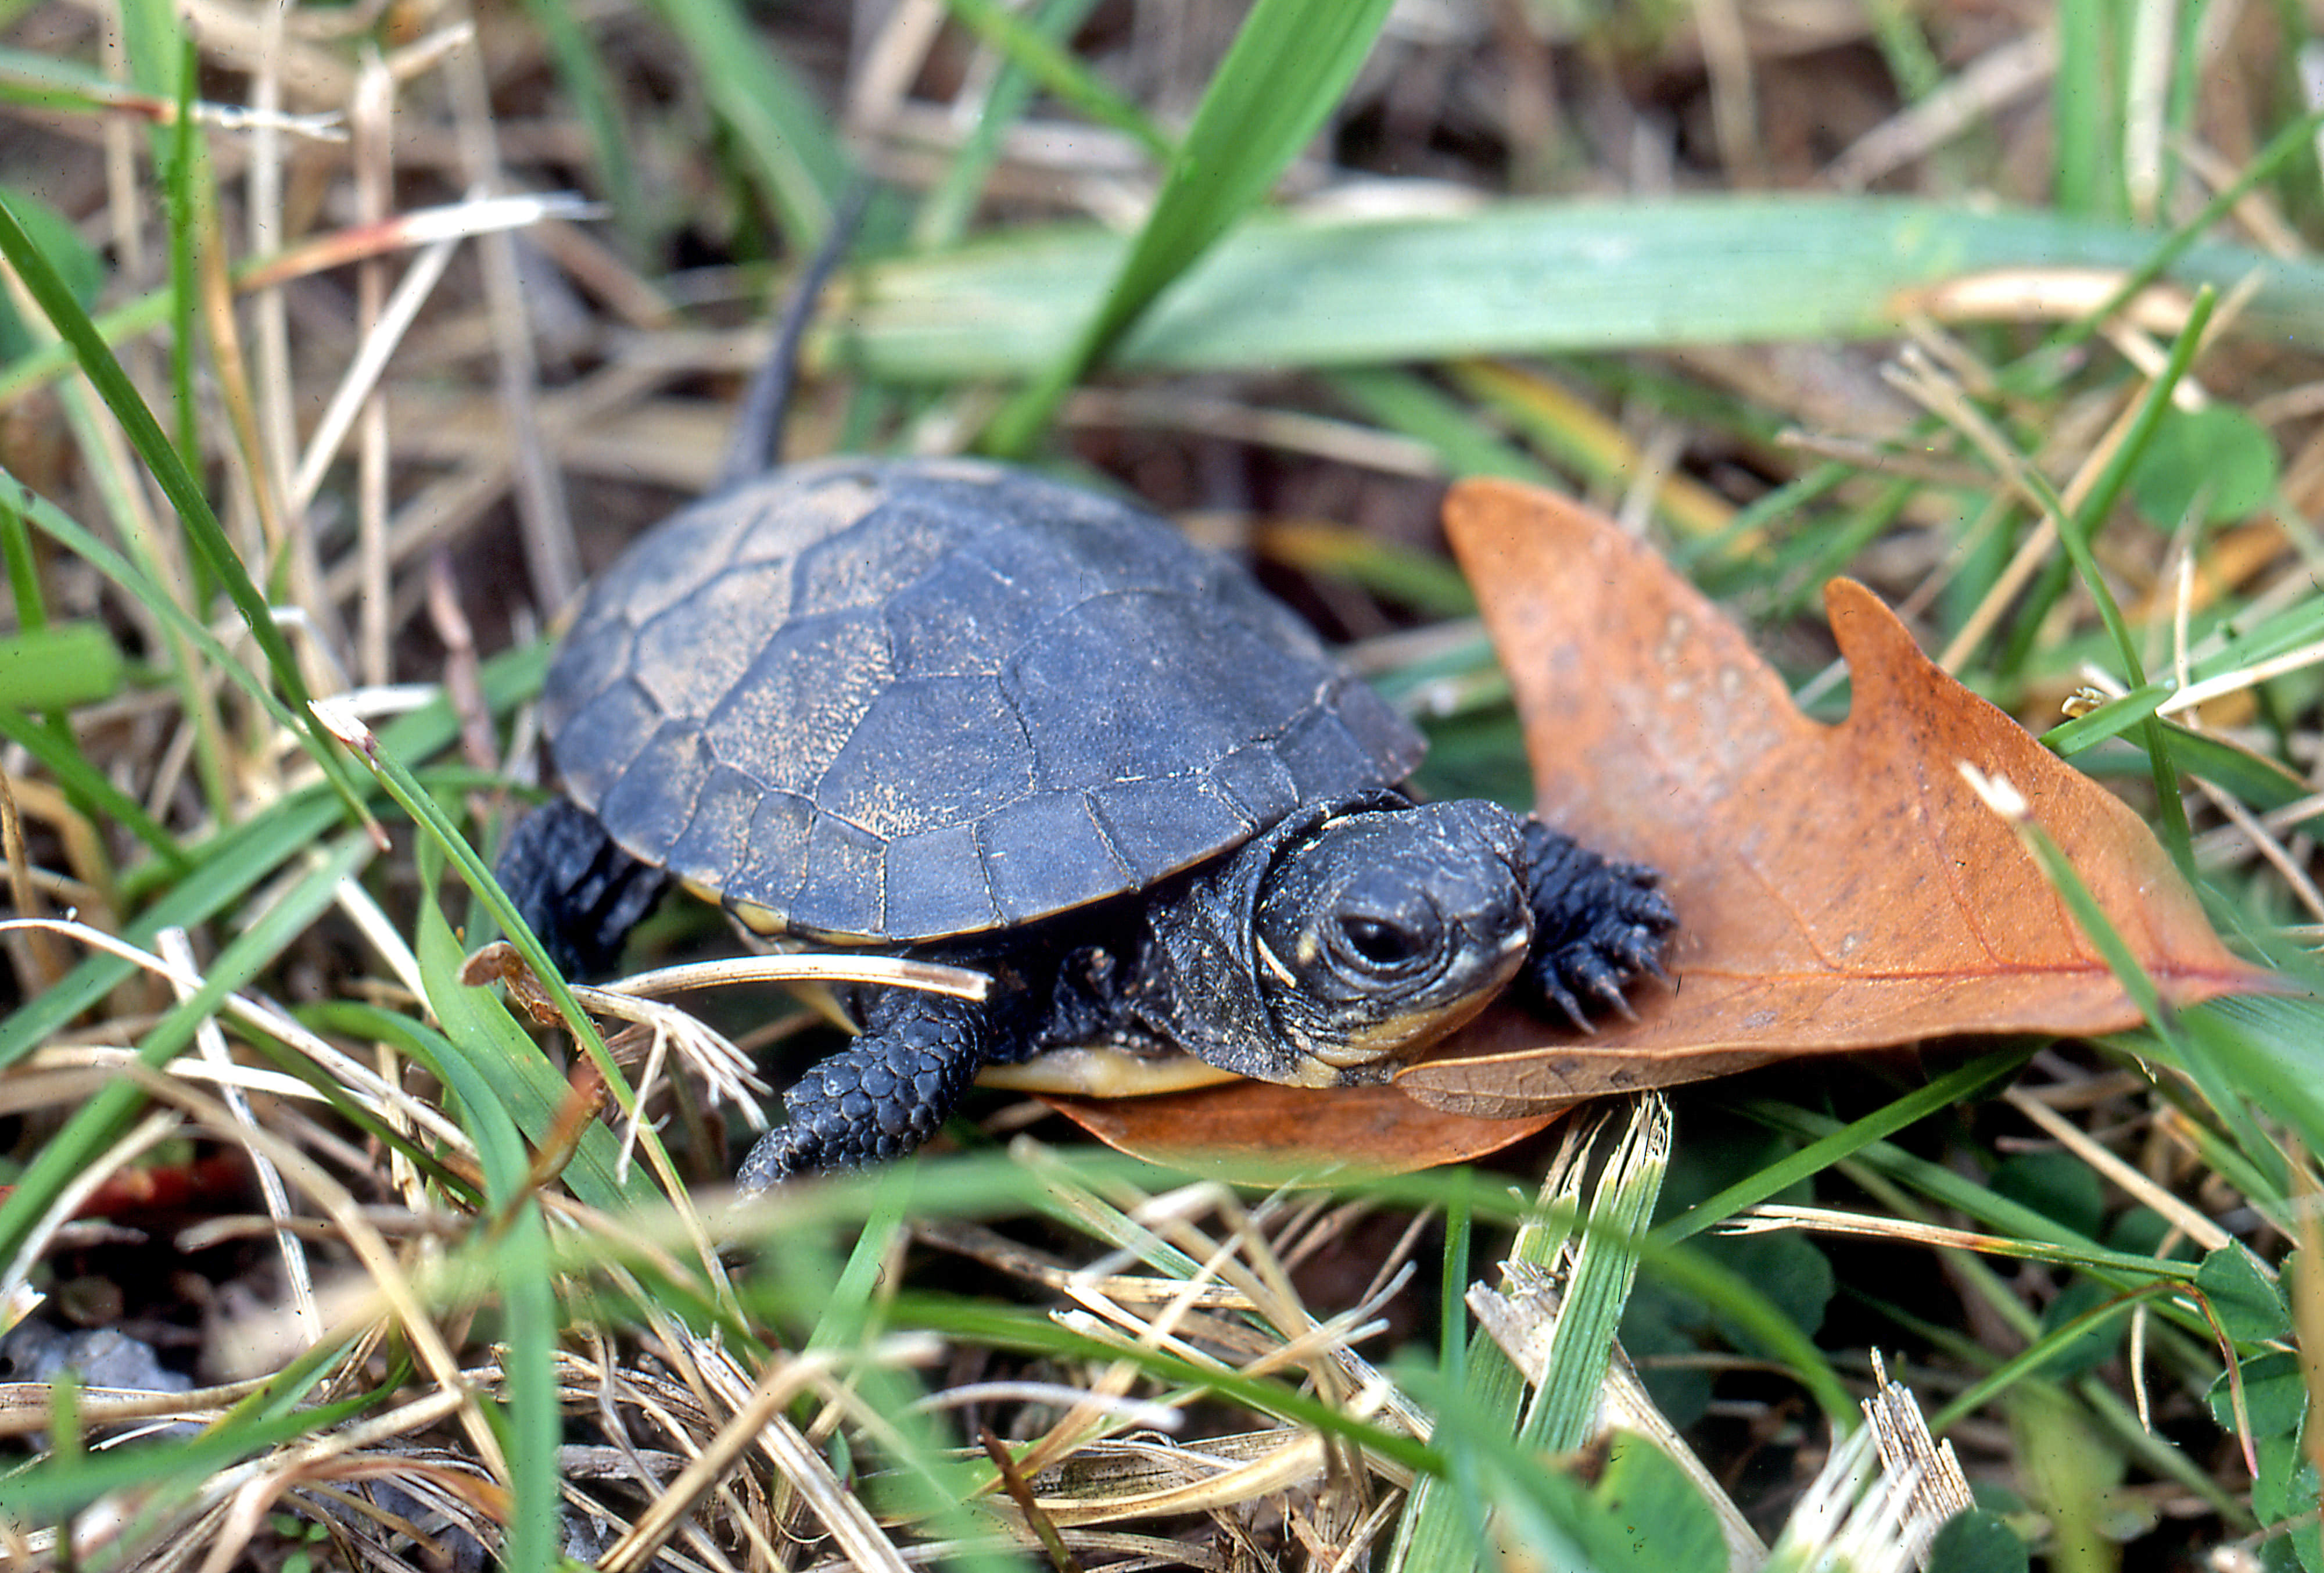 a small dark turtle on leaf surrounded by green grass.